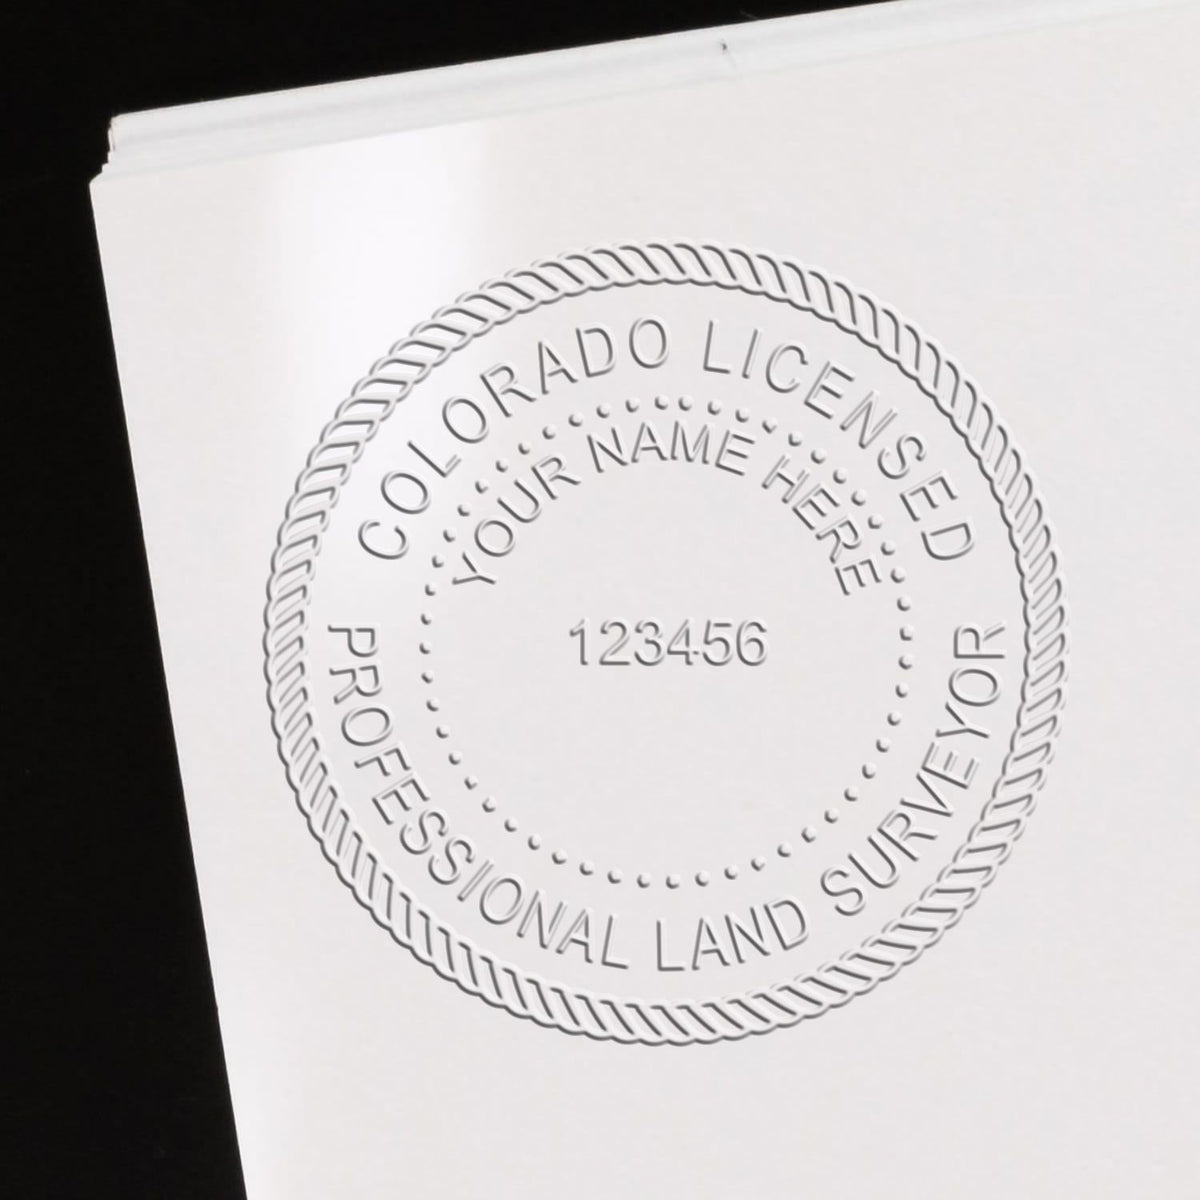 An in use photo of the Hybrid Colorado Land Surveyor Seal showing a sample imprint on a cardstock